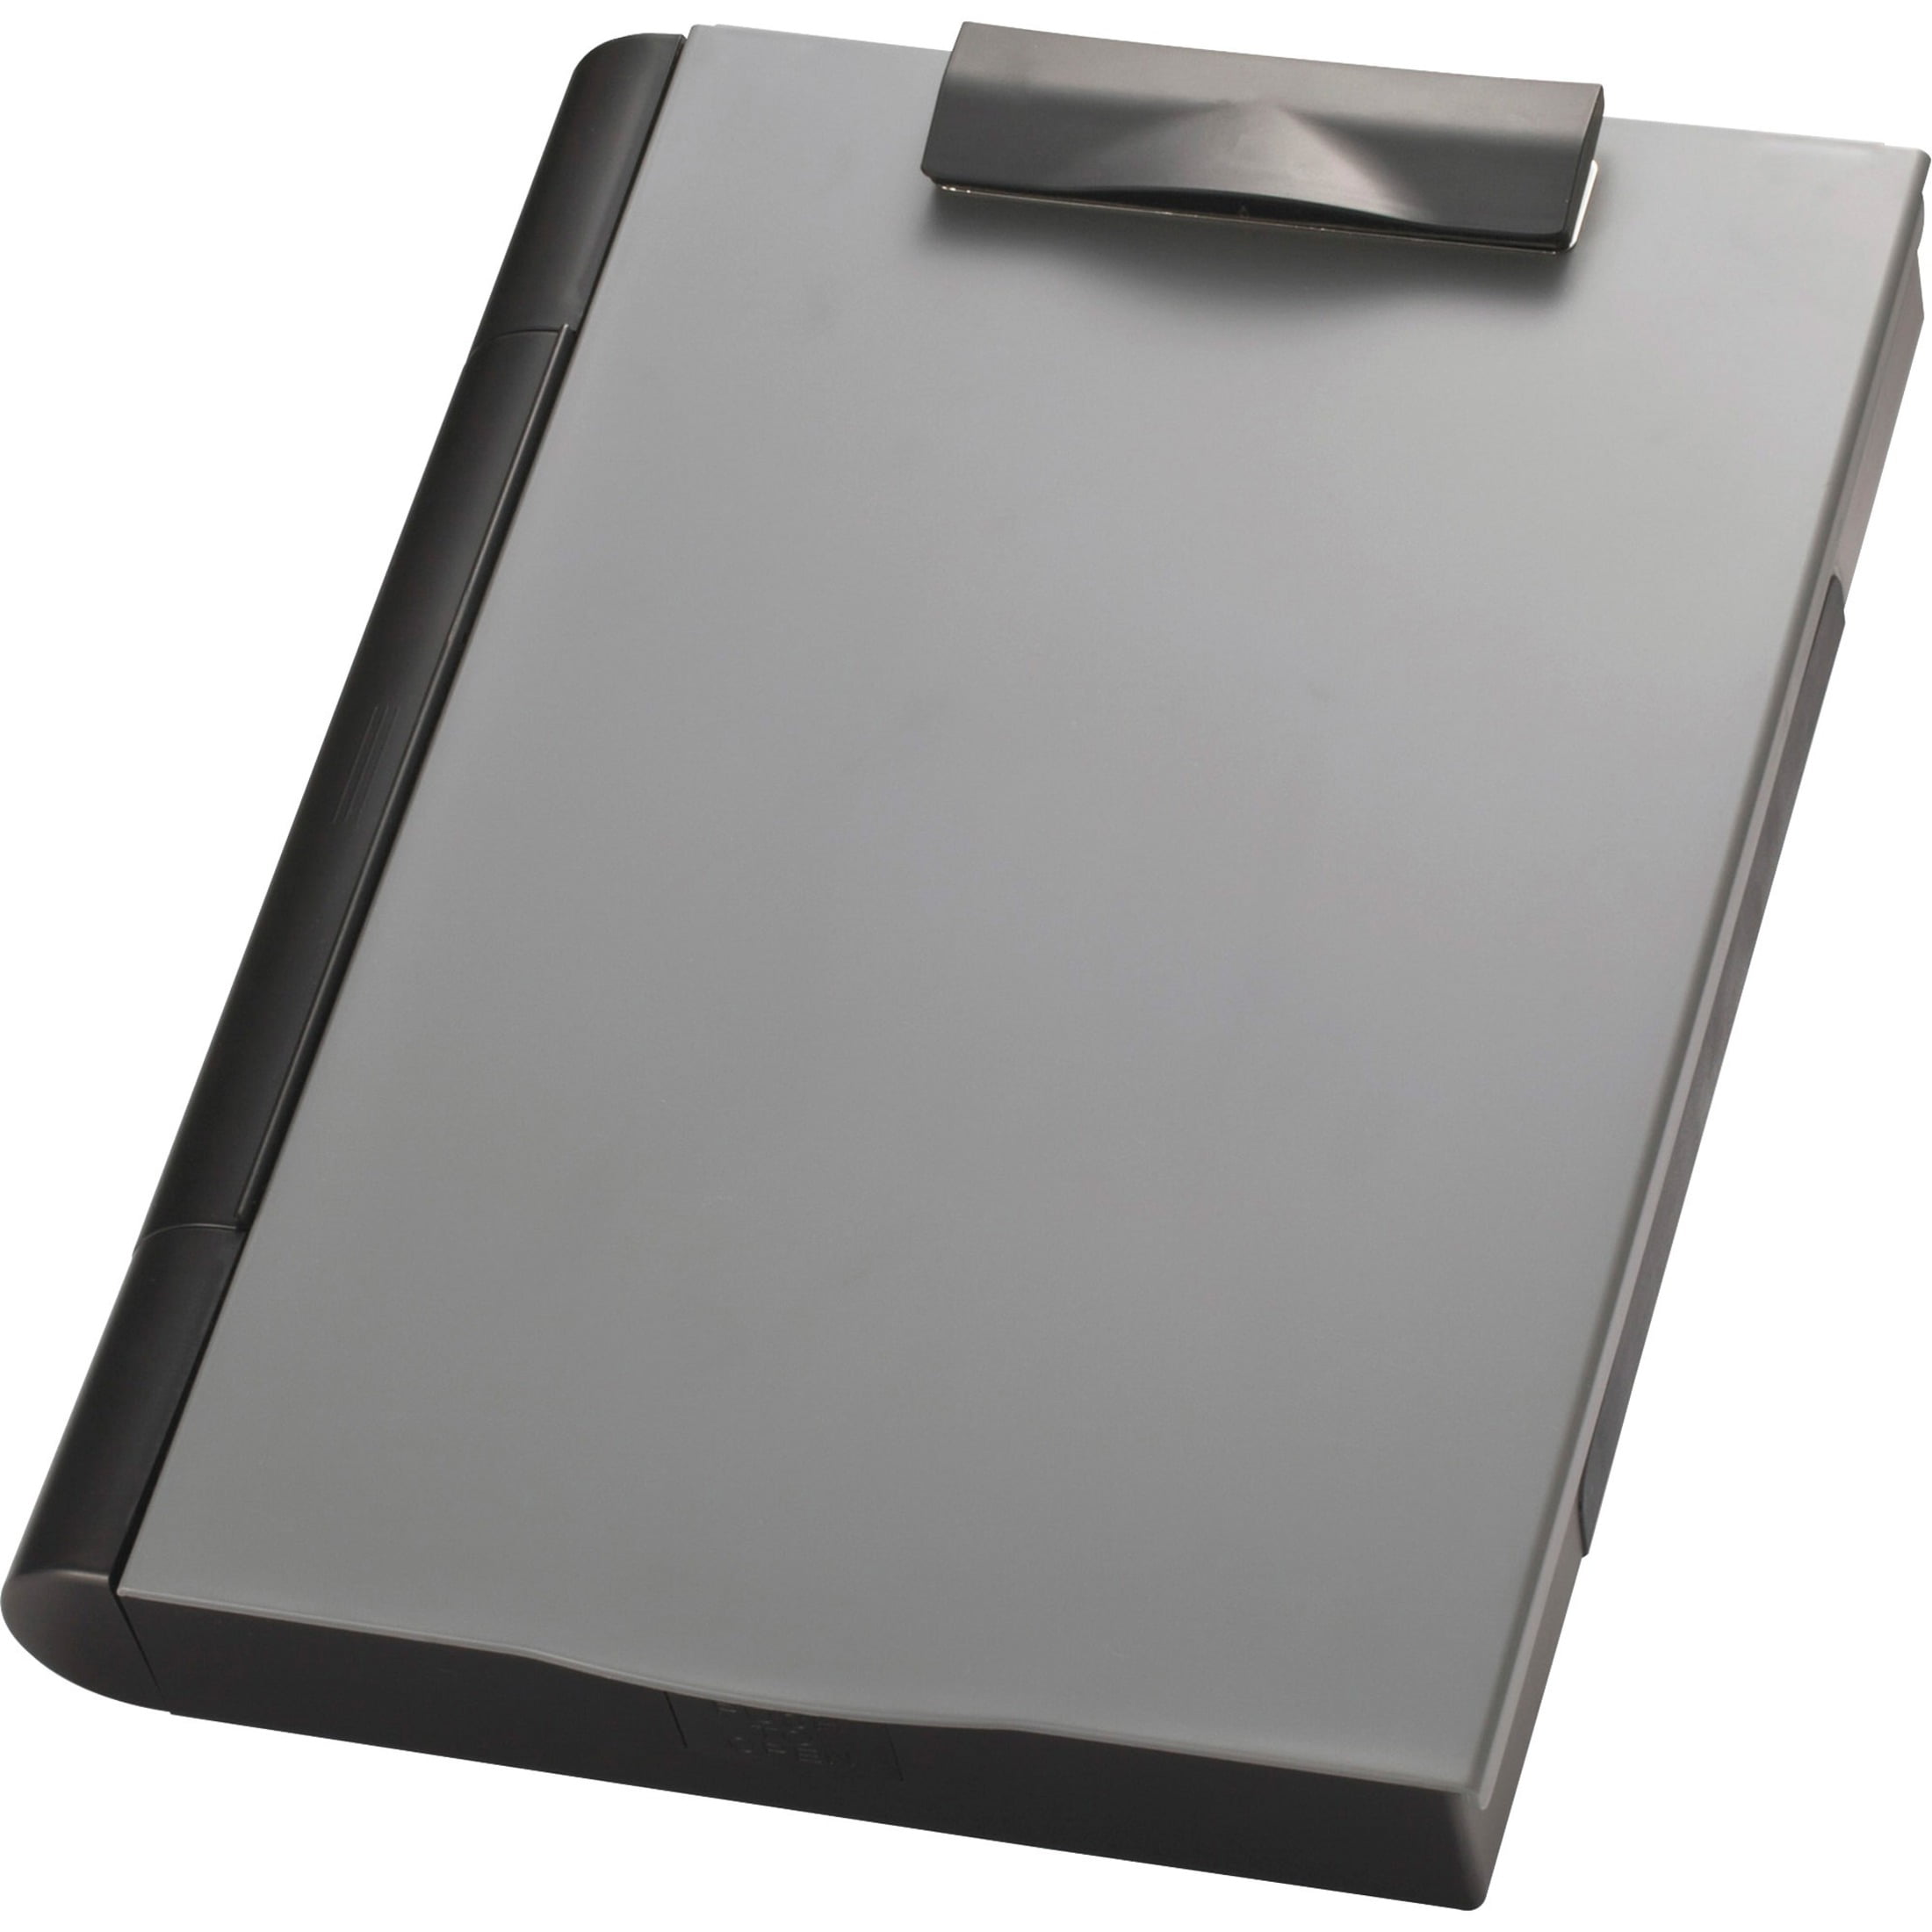 Details about   Officemate OIC Carry All Clipboard Storage Box LetterLegal Size Black and